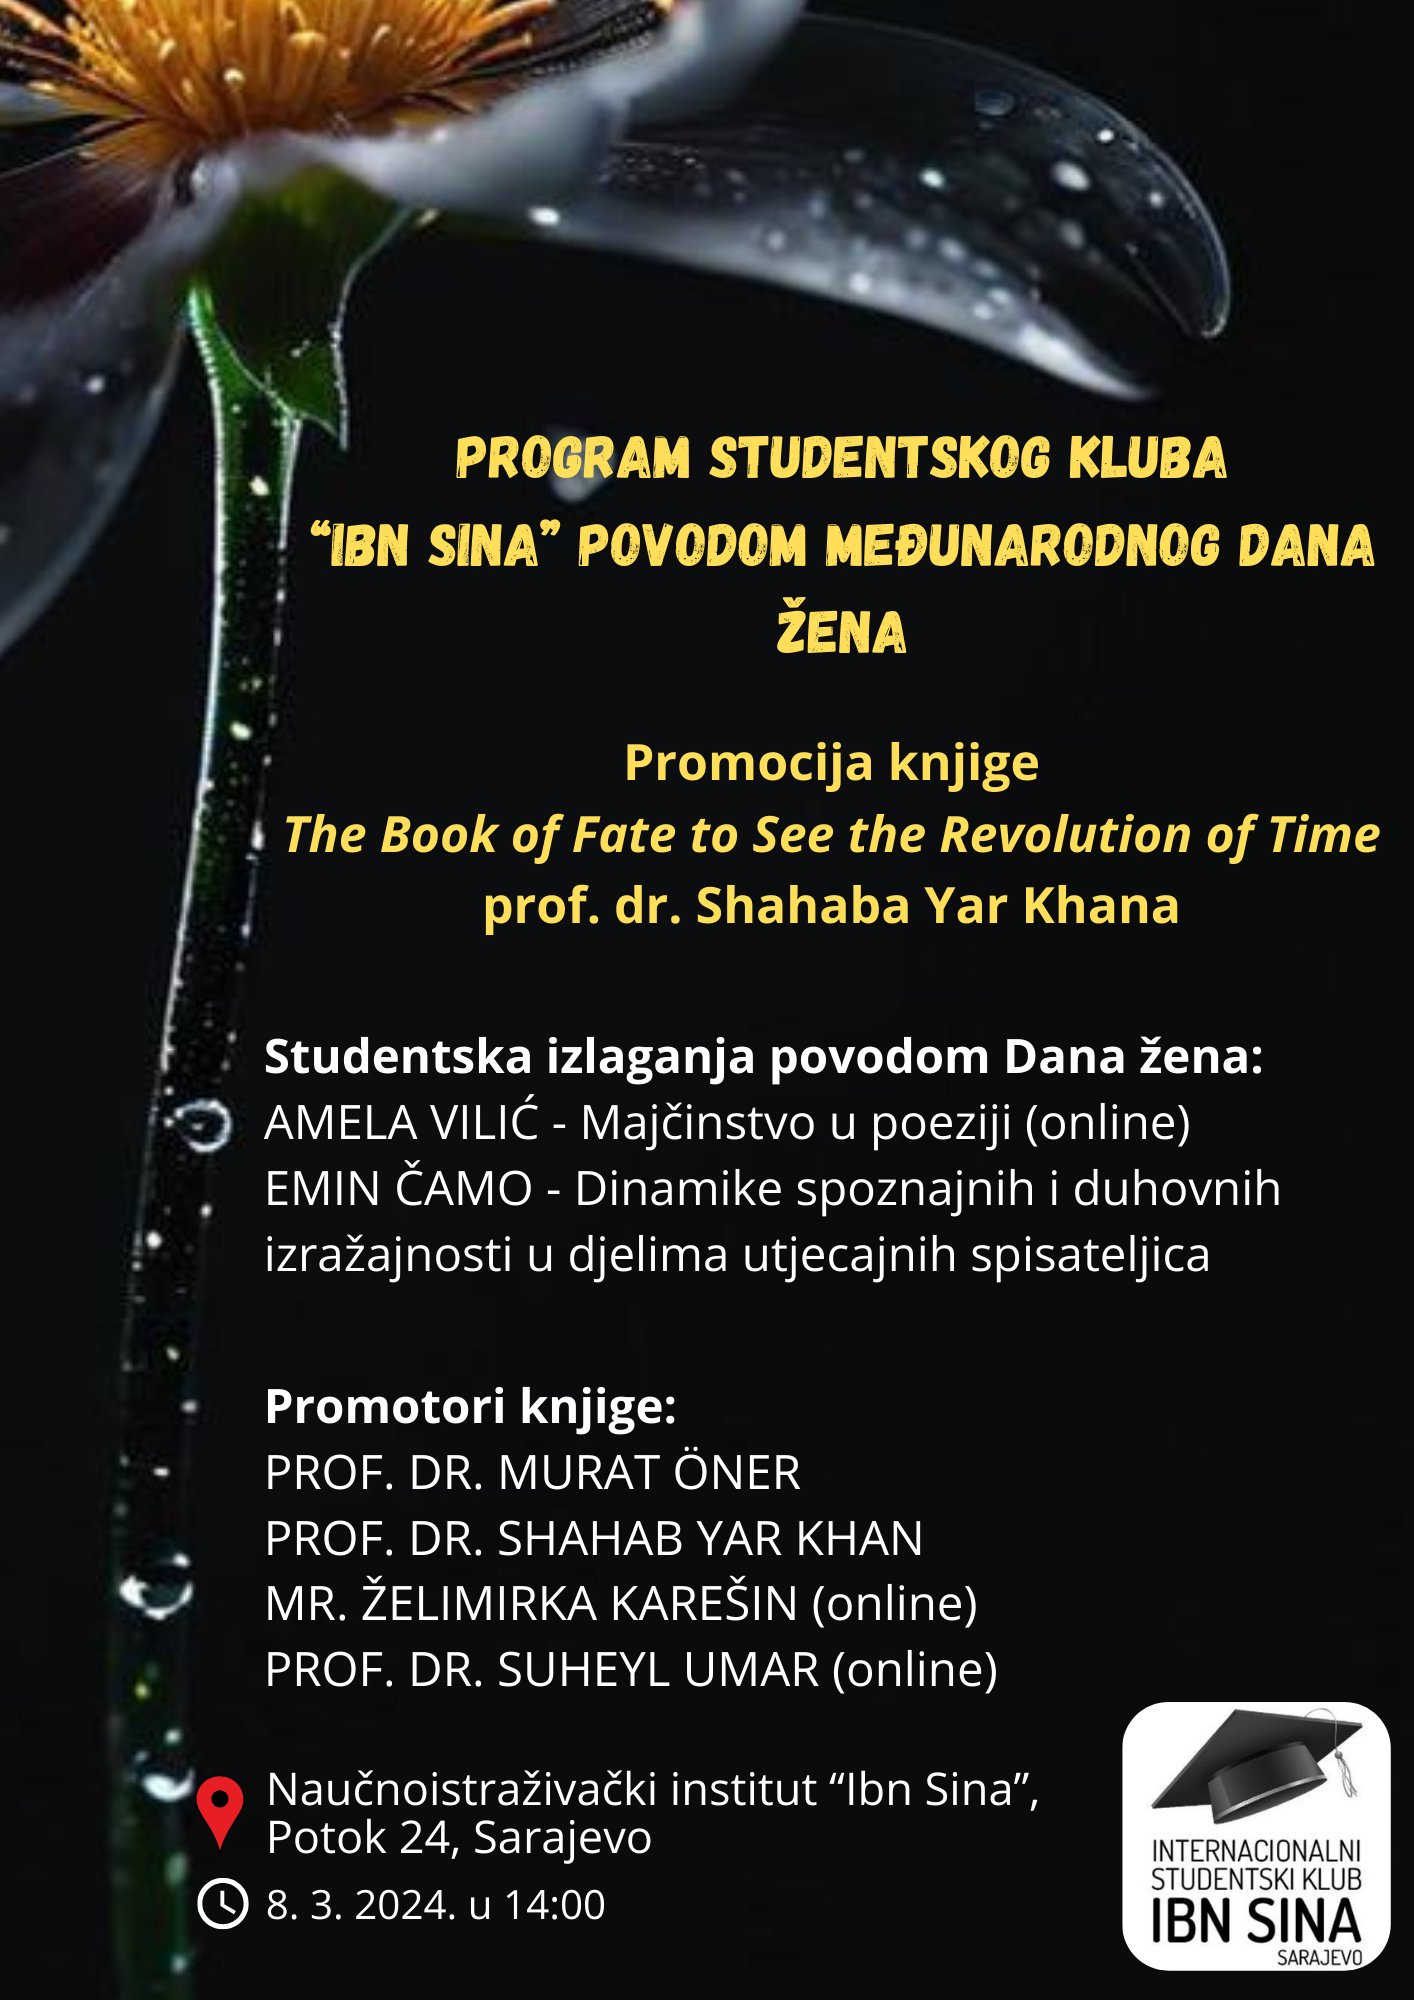 A Two Part Program of the International Students Club “Ibn Sina” on the Occasion of the International Women’s Day, and the Promotion of “The Book of Fate to See the Revolution of Time”, by Prof. Shahab Yar Khan phD